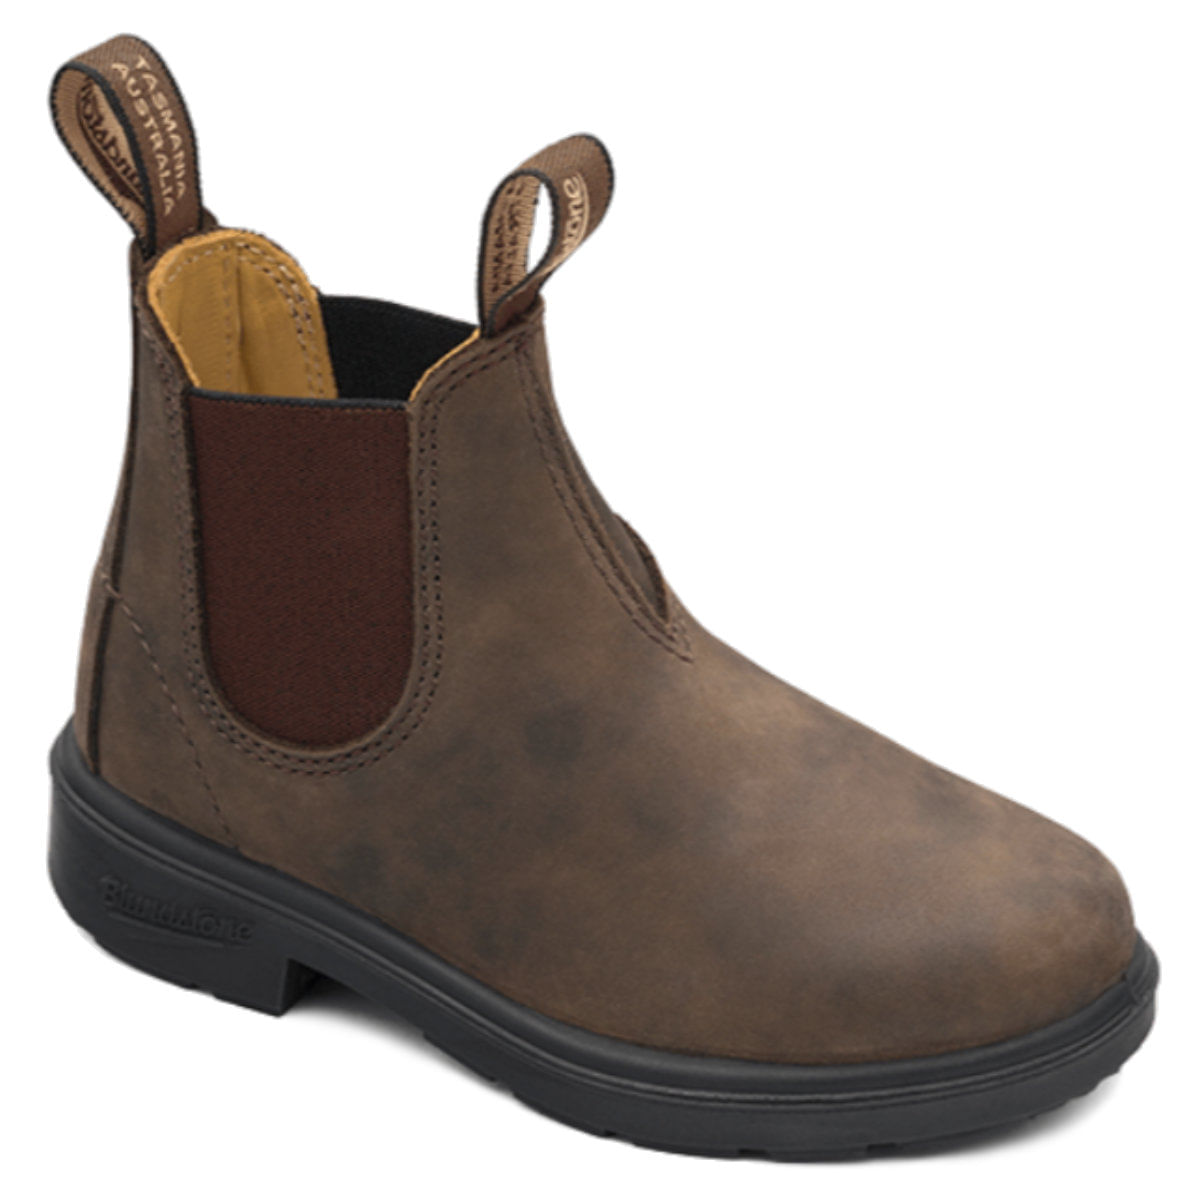 Blundstone Style 565 Boots - Kids 